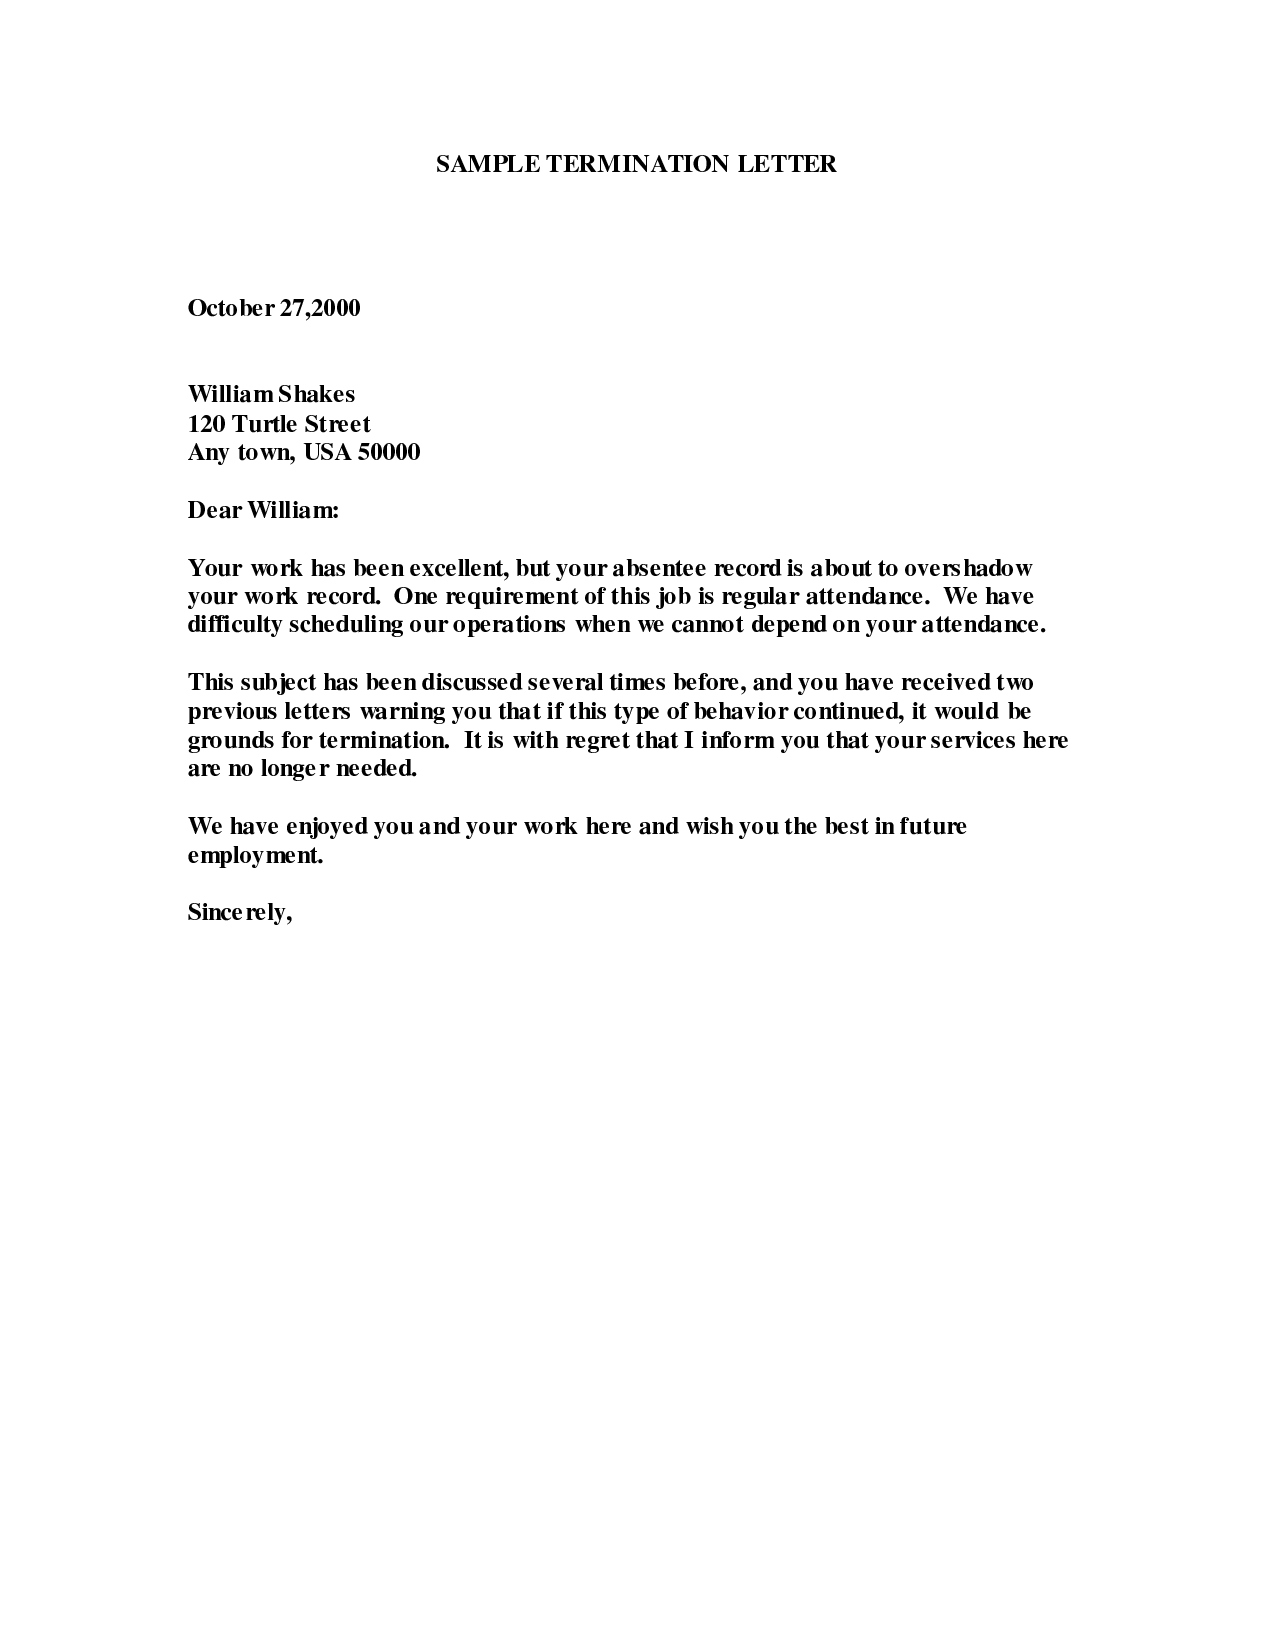 Letter Of Recommendation For Terminated Employee Sample • Invitation Template Ideas 3305